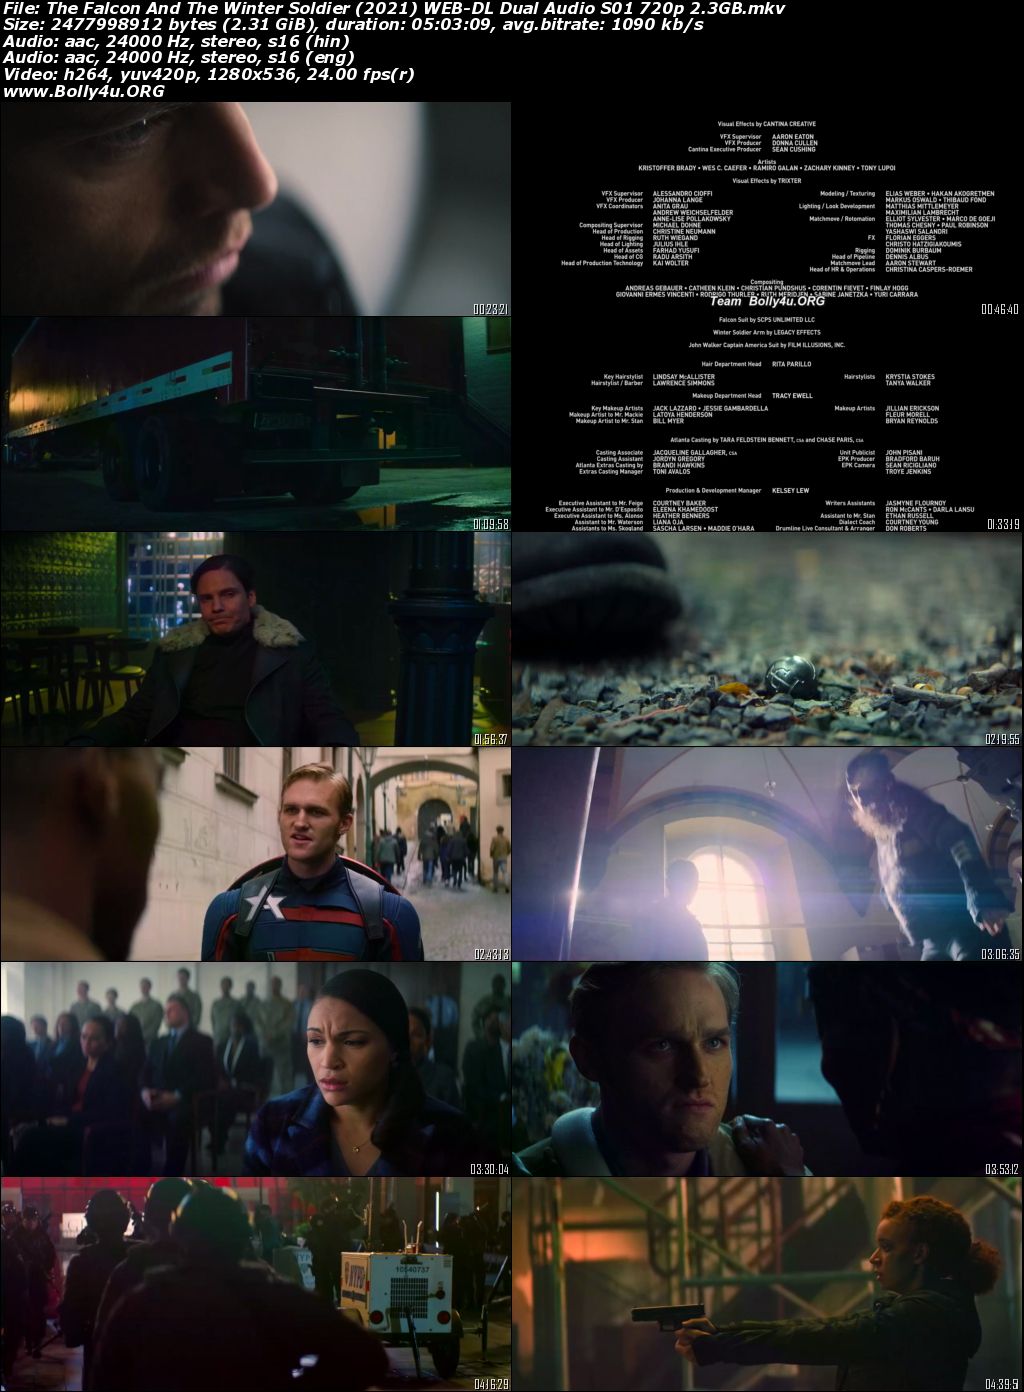 The Falcon And The Winter Soldier 2021 WEB-DL 2.3Gb Hindi Dual Audio S01 Download 720p